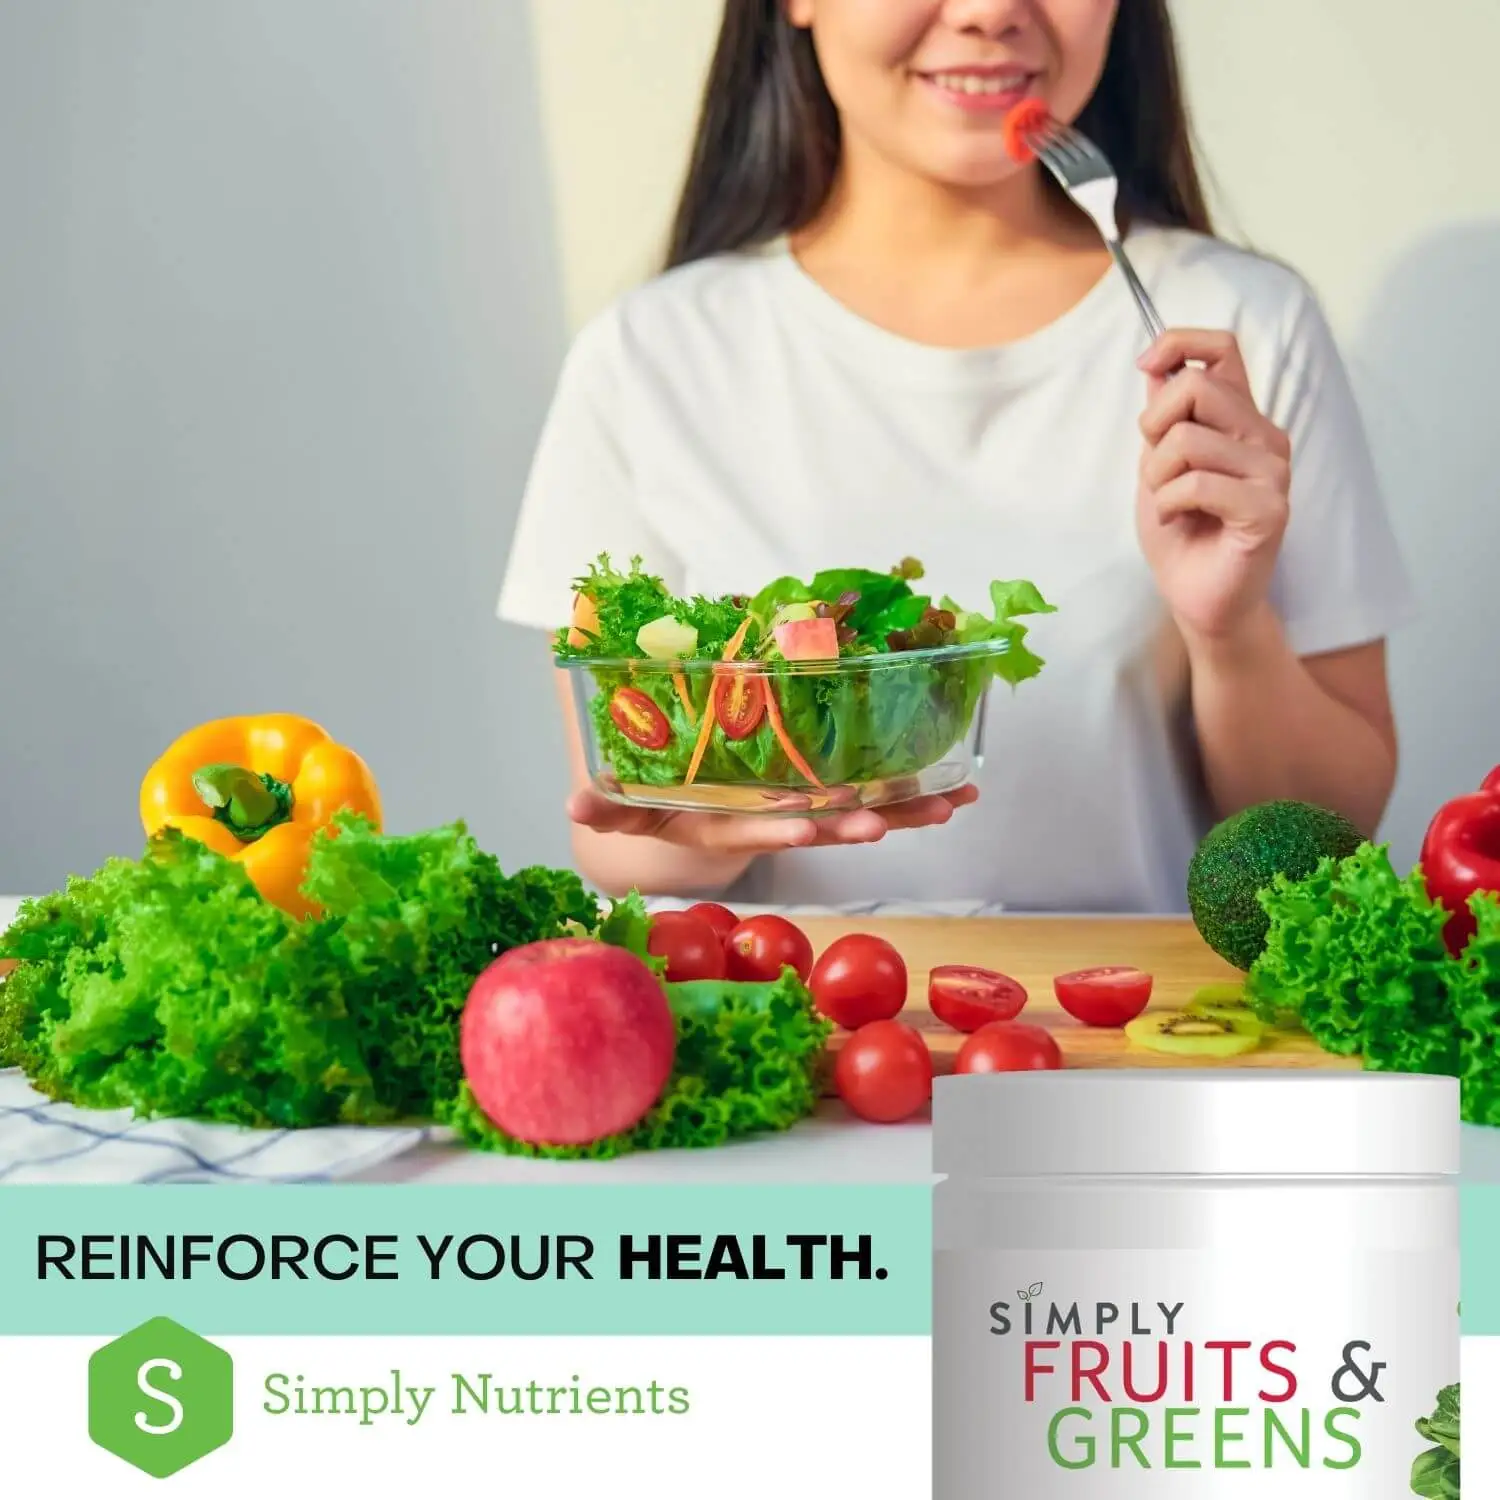 Image of a table covered in fruits and vegetables and someone holding a salad symbolizing the health benefits of using Simply Nutrients.